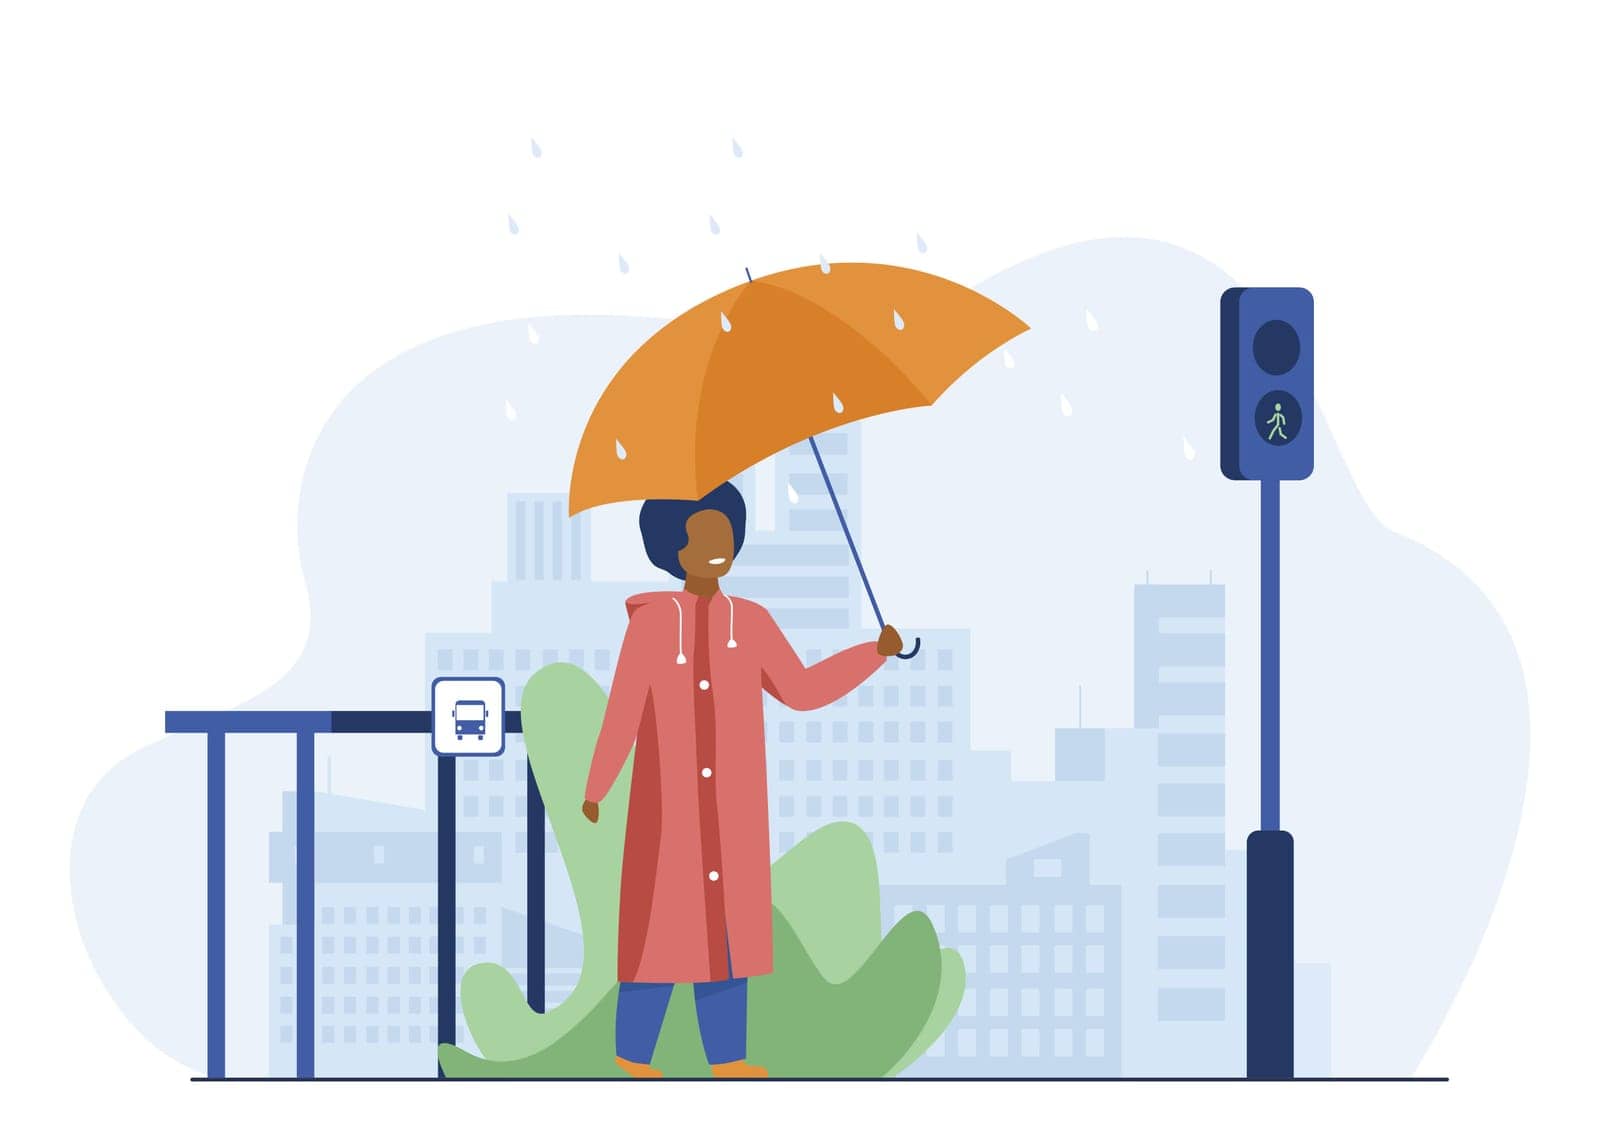 Boy with umbrella crossing road in rainy day. City, pedestrian, traffic lights flat vector illustration. Weather and urban lifestyle concept for banner, website design or landing web page